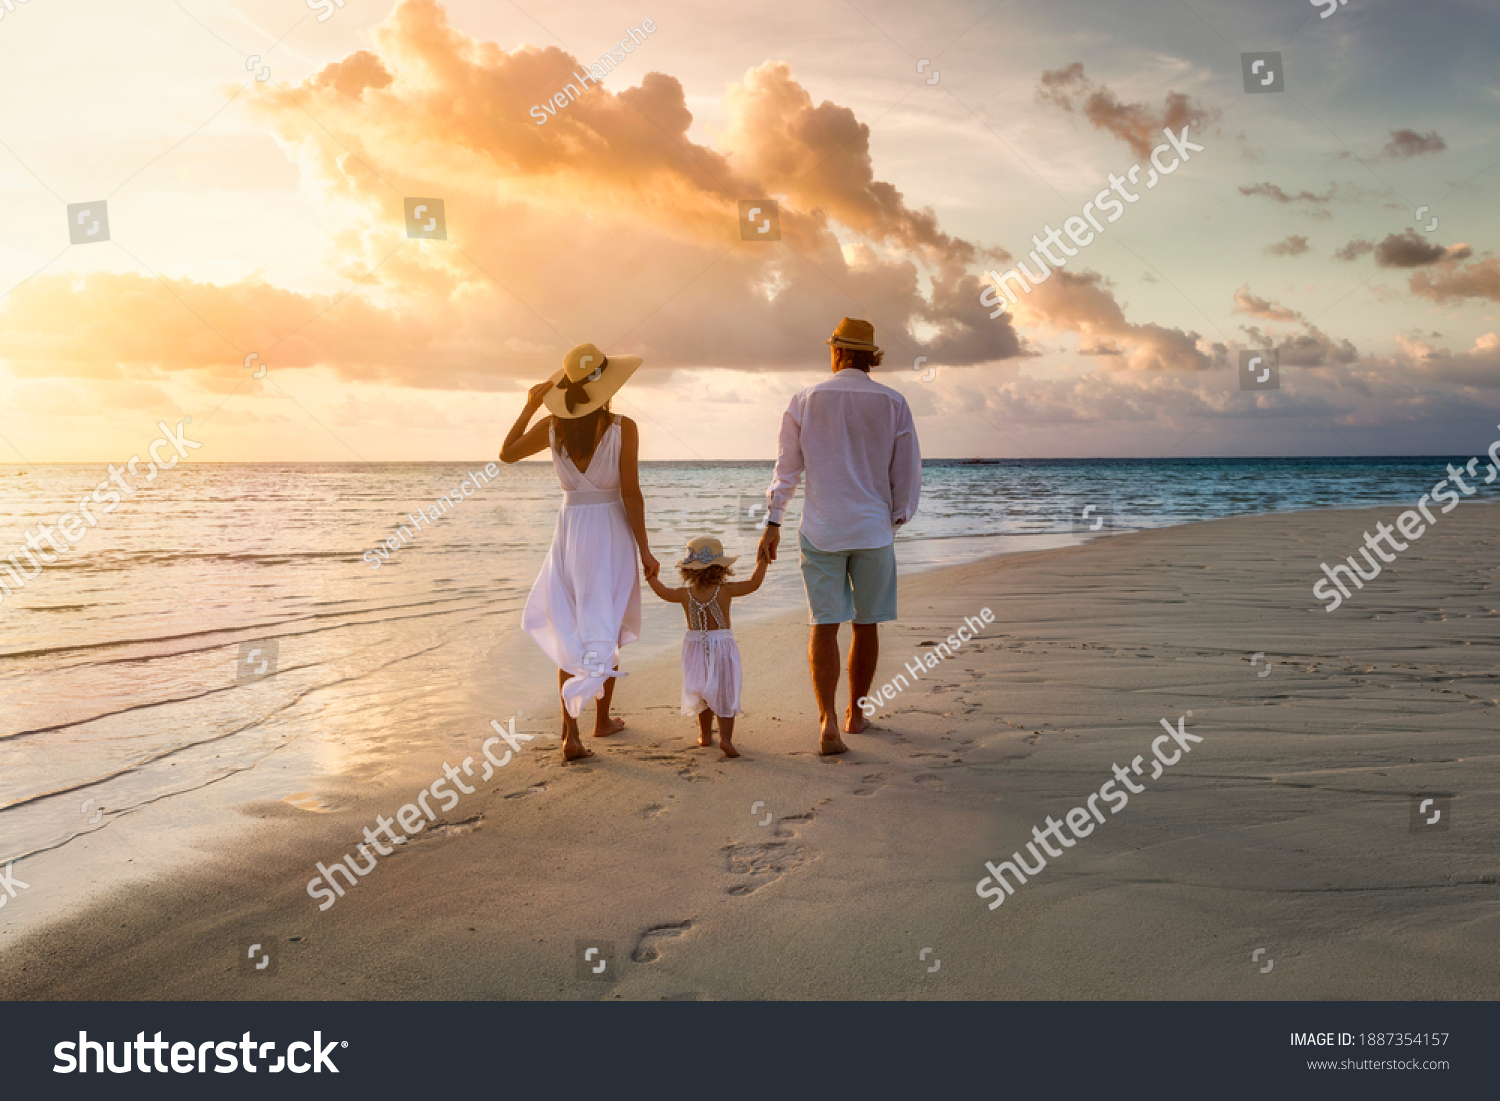 A elegant family in white summer clothing walks hand in hand down a tropical paradise beach during sunset tme and enjoys their vacation time #1887354157